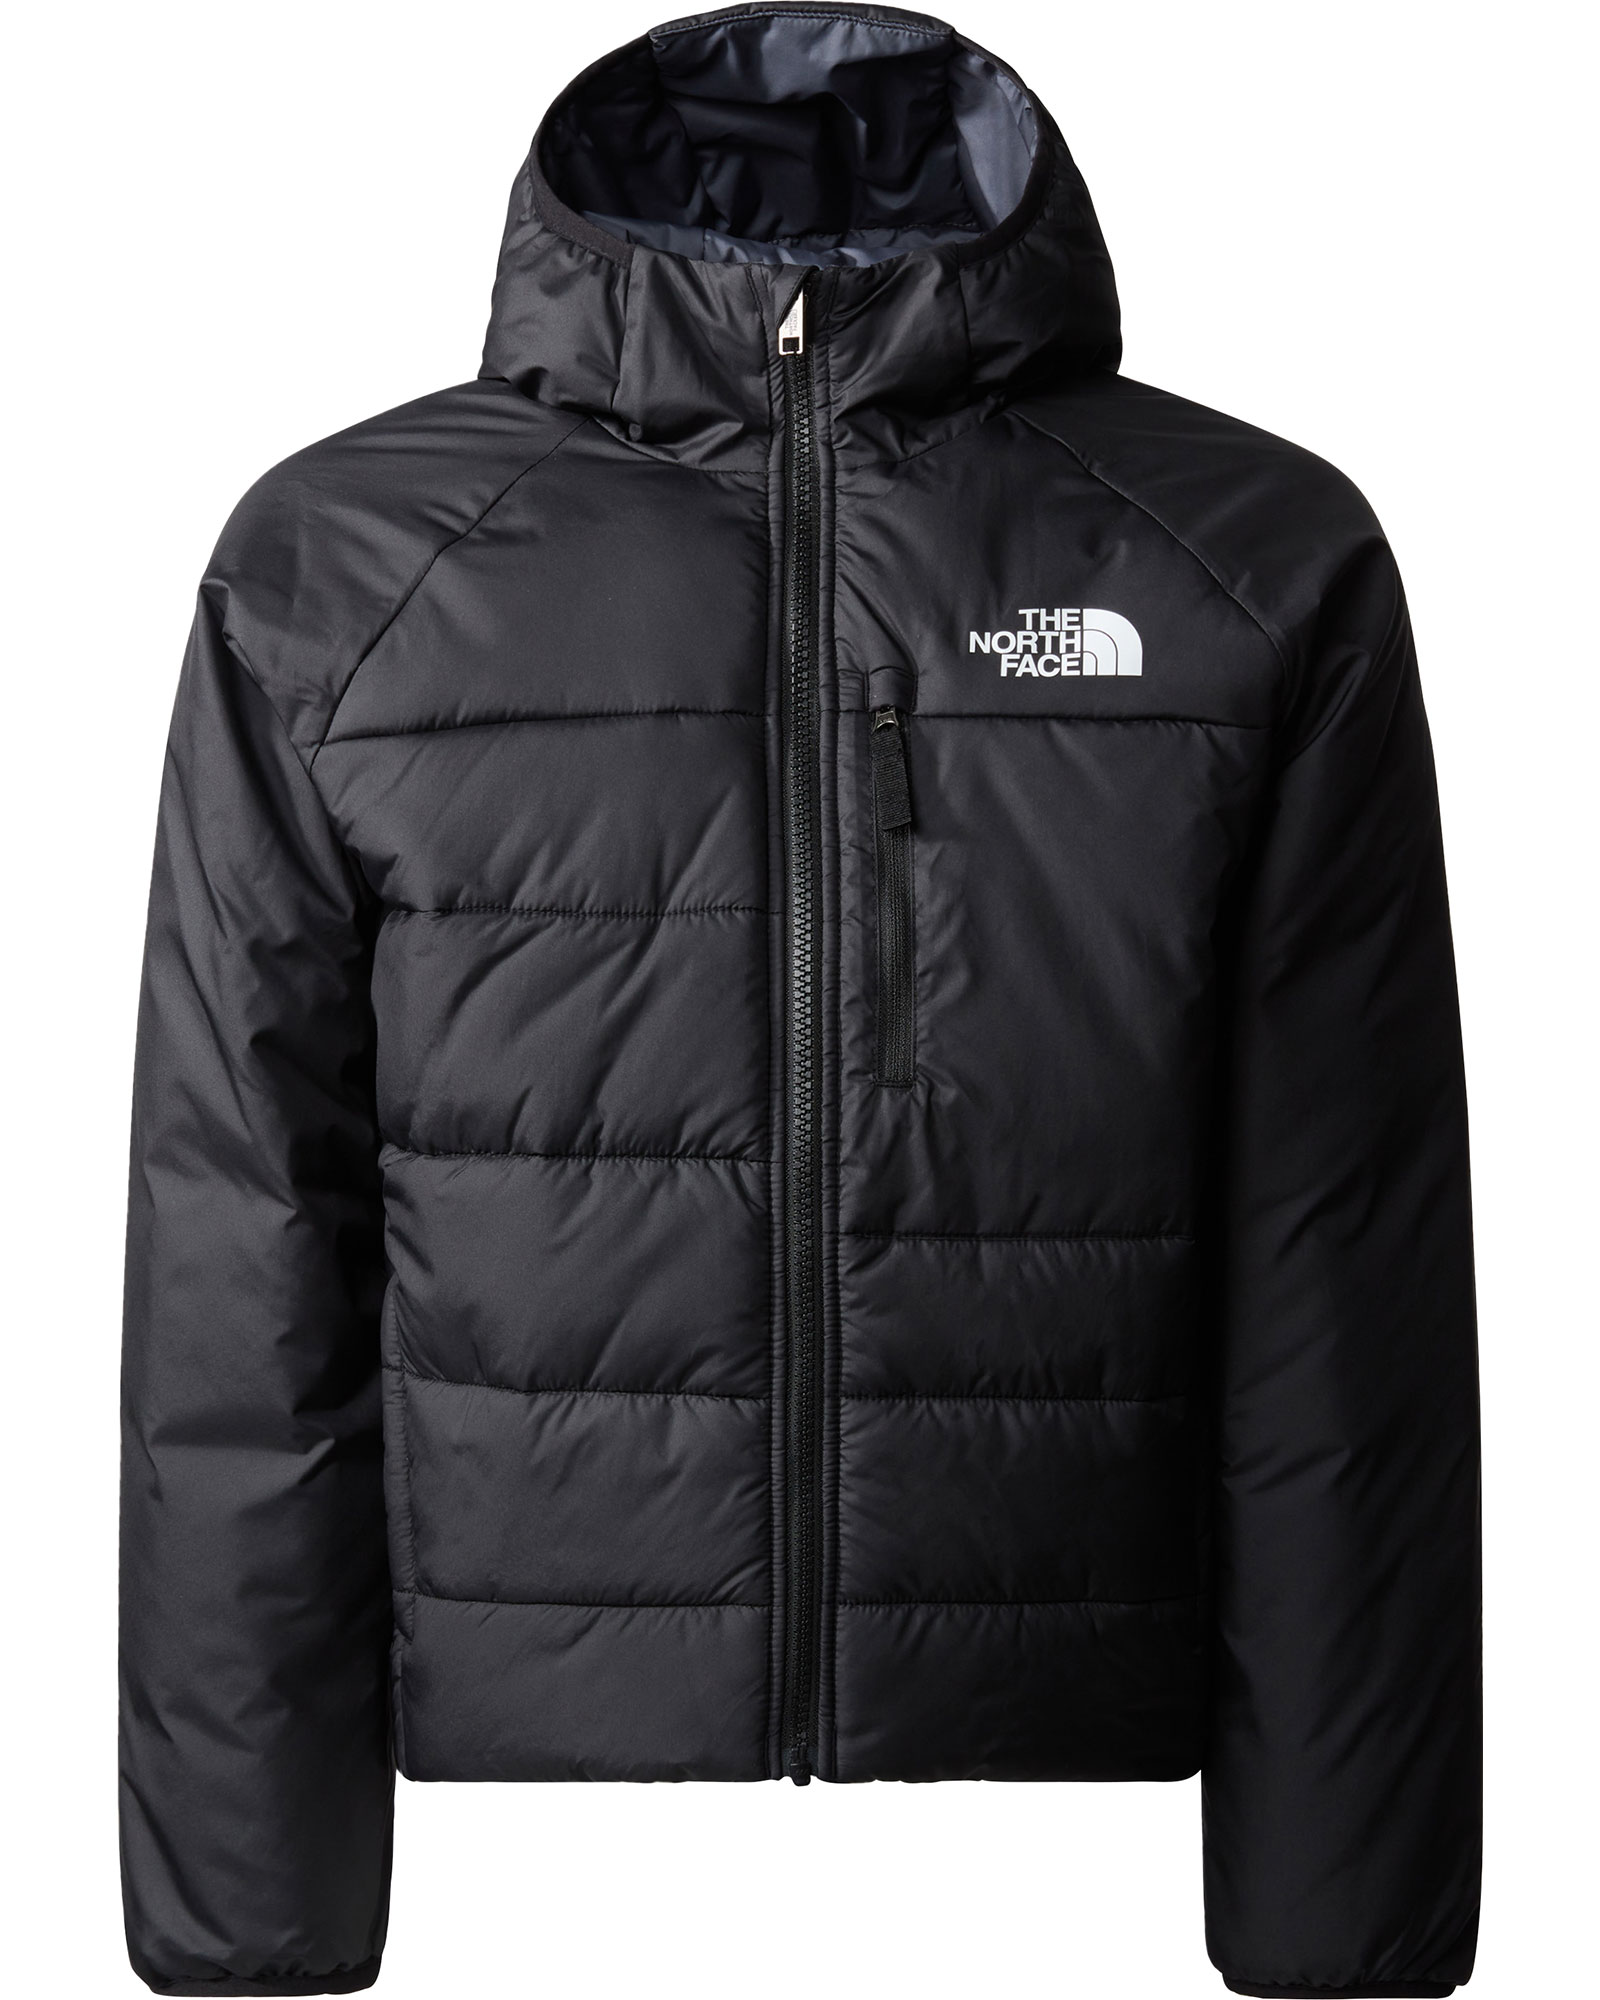 The North Face Boy's Reversible Perrito Insulated Jacket